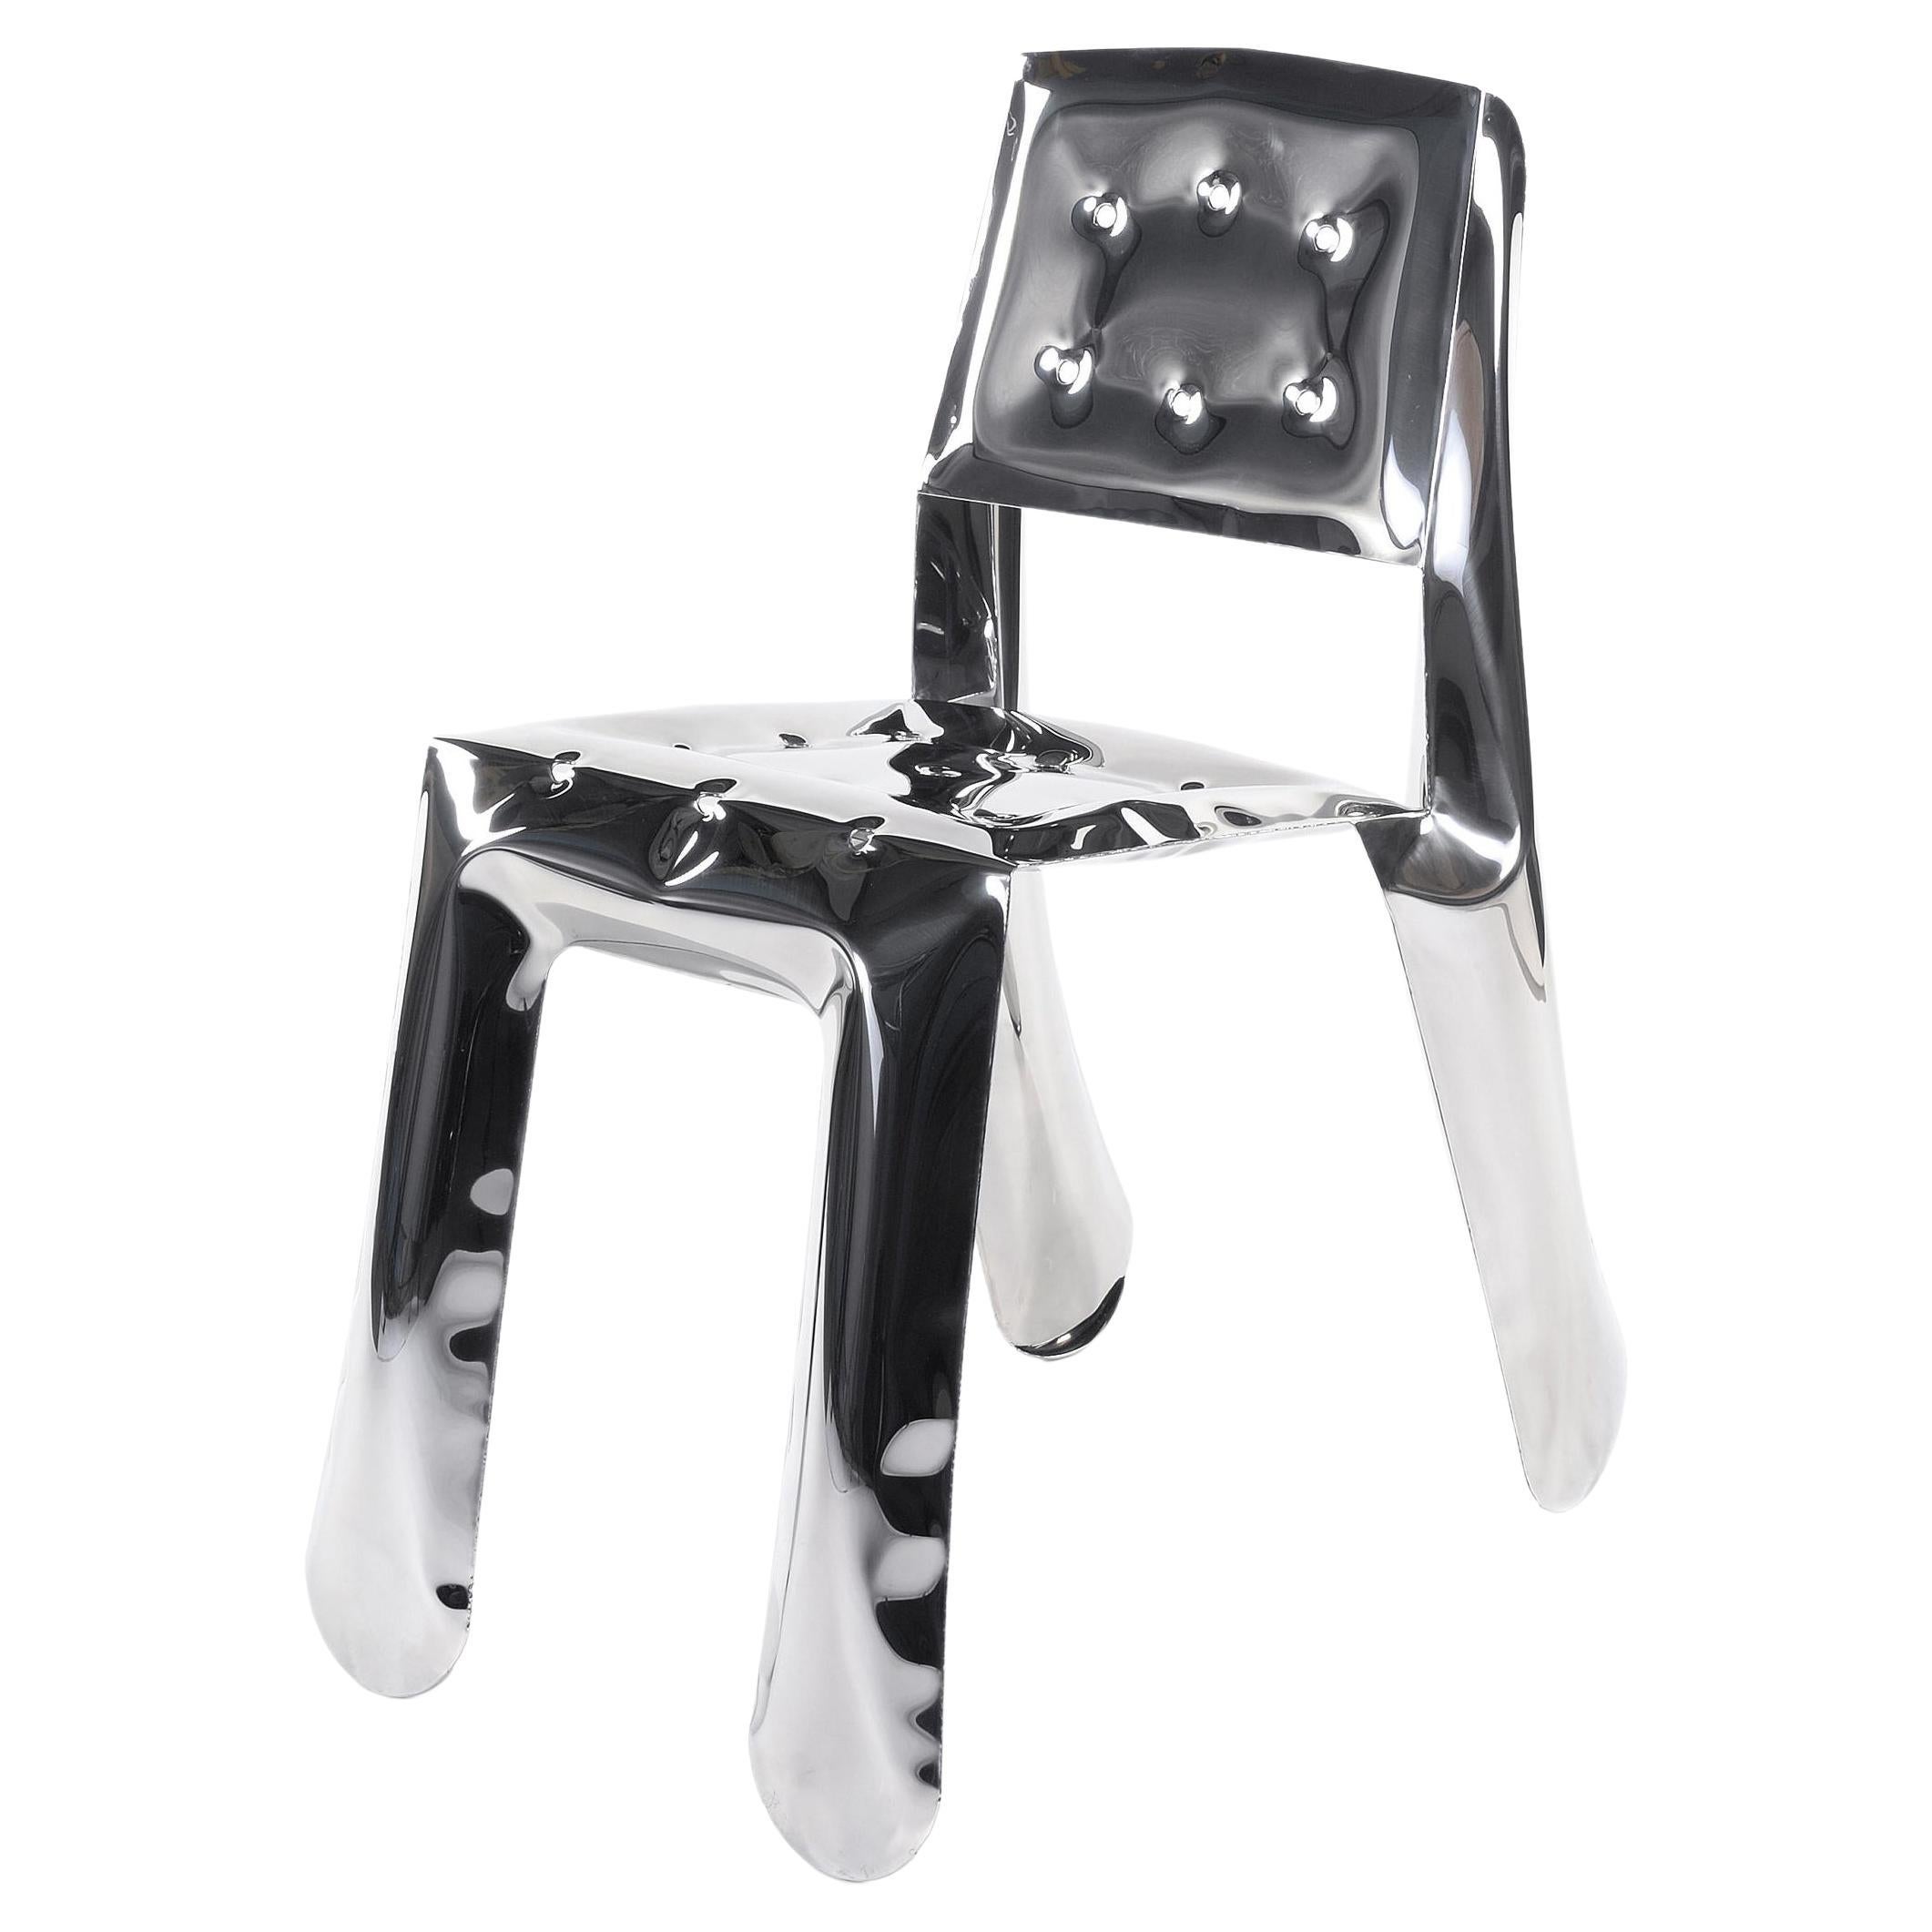 Stainless Steel Chippensteel 0.5 Sculptural Chair by Zieta For Sale